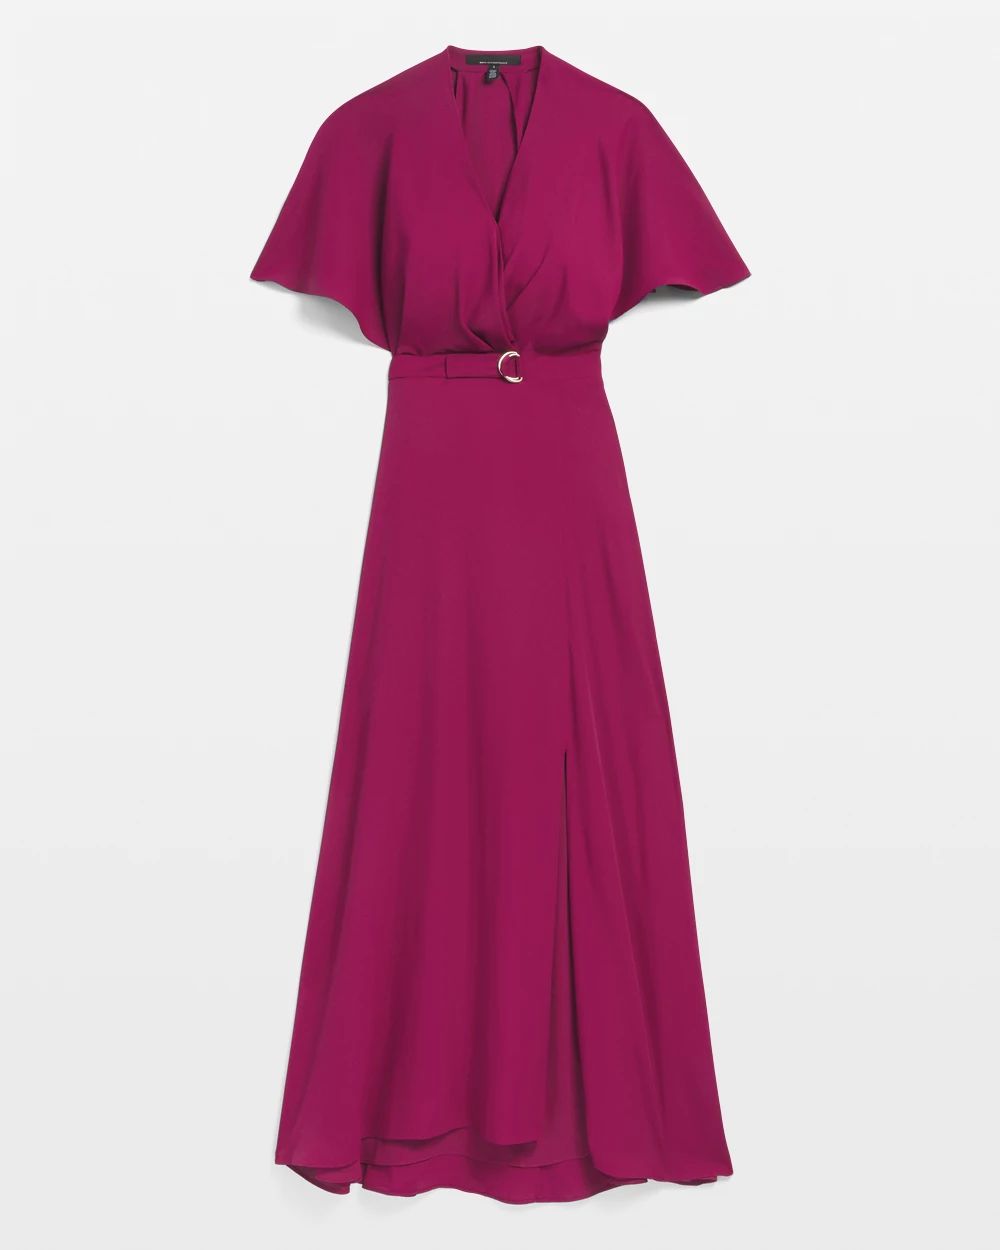 Cape Belted Maxi With Slit Dress click to view larger image.